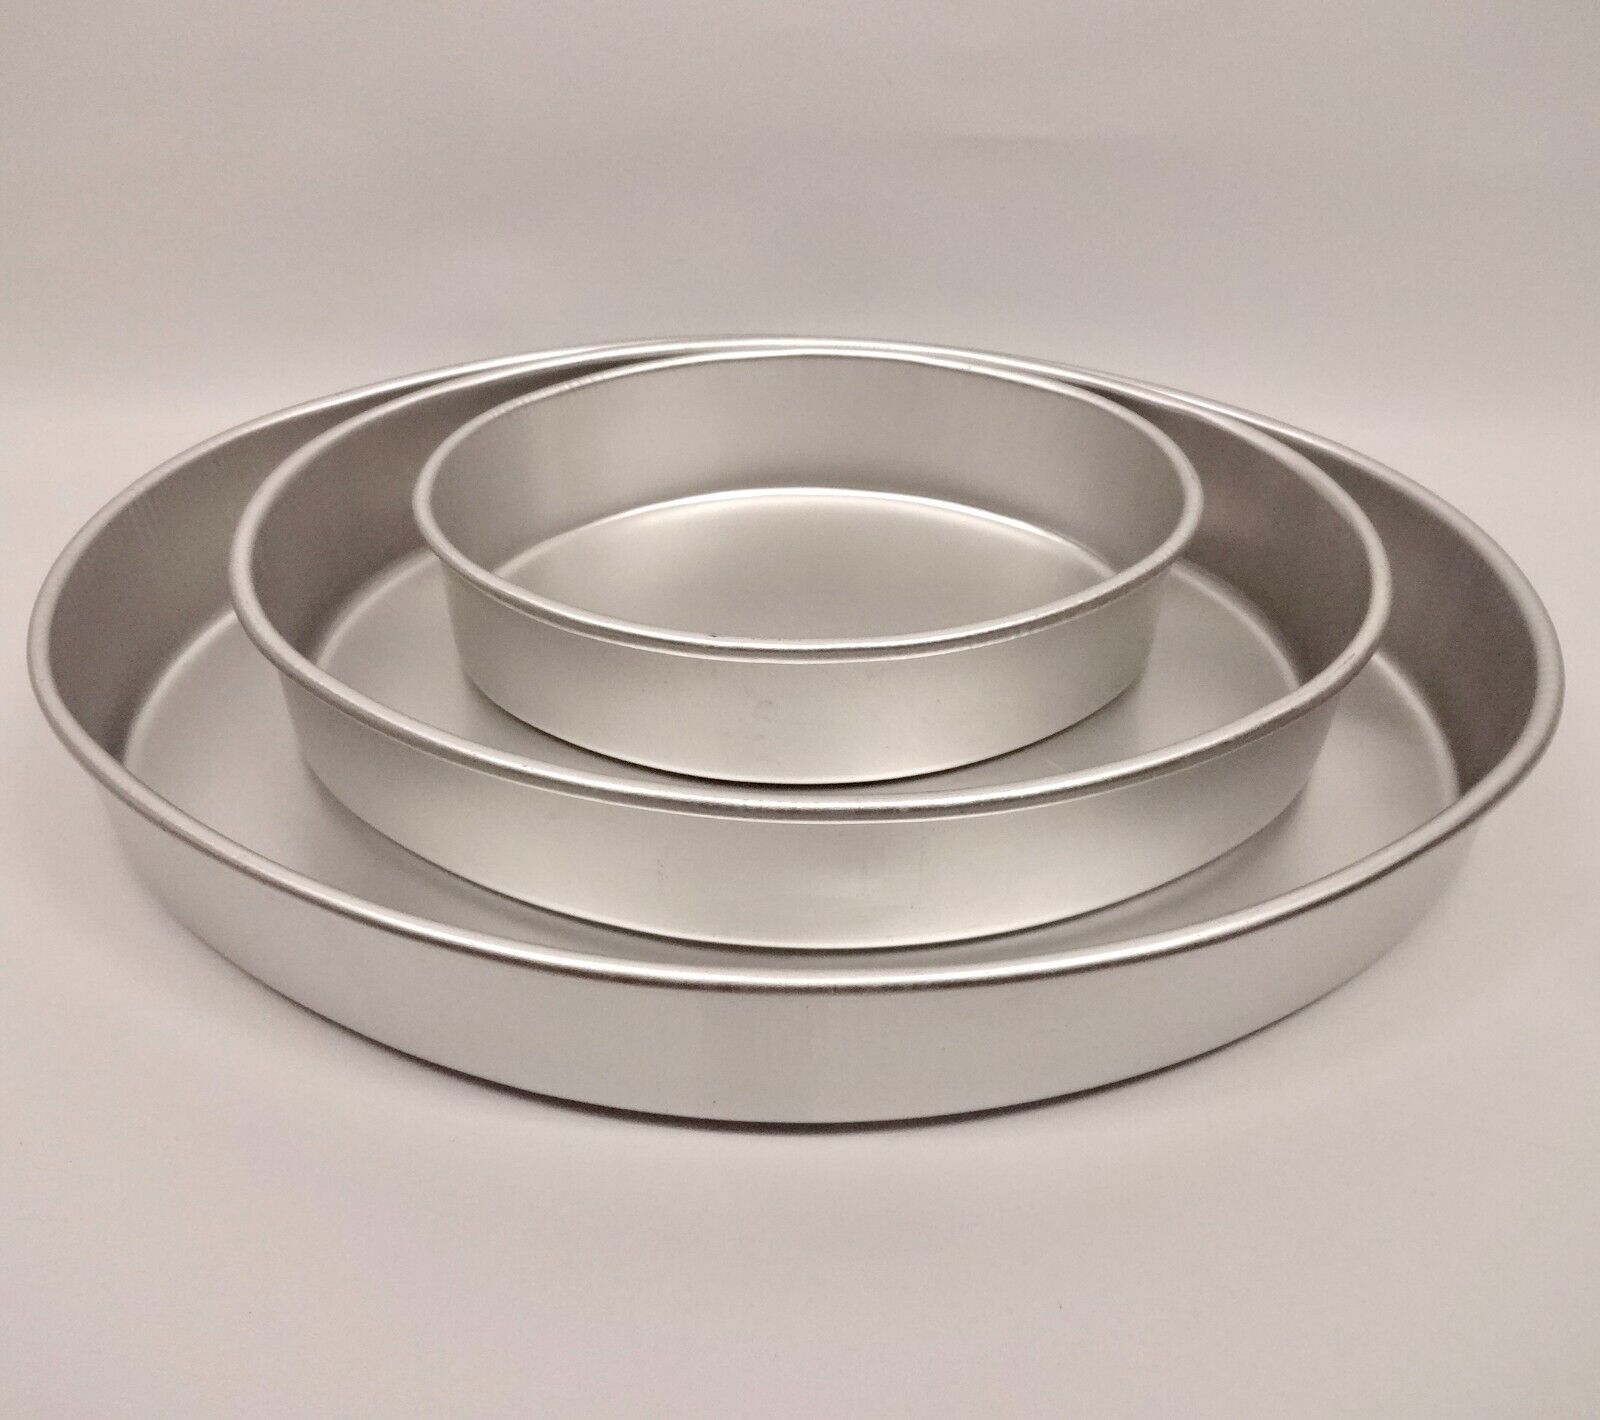 Wilton Performance Aluminum Oval Pans 3 pieces  - #502-2130 Made in China